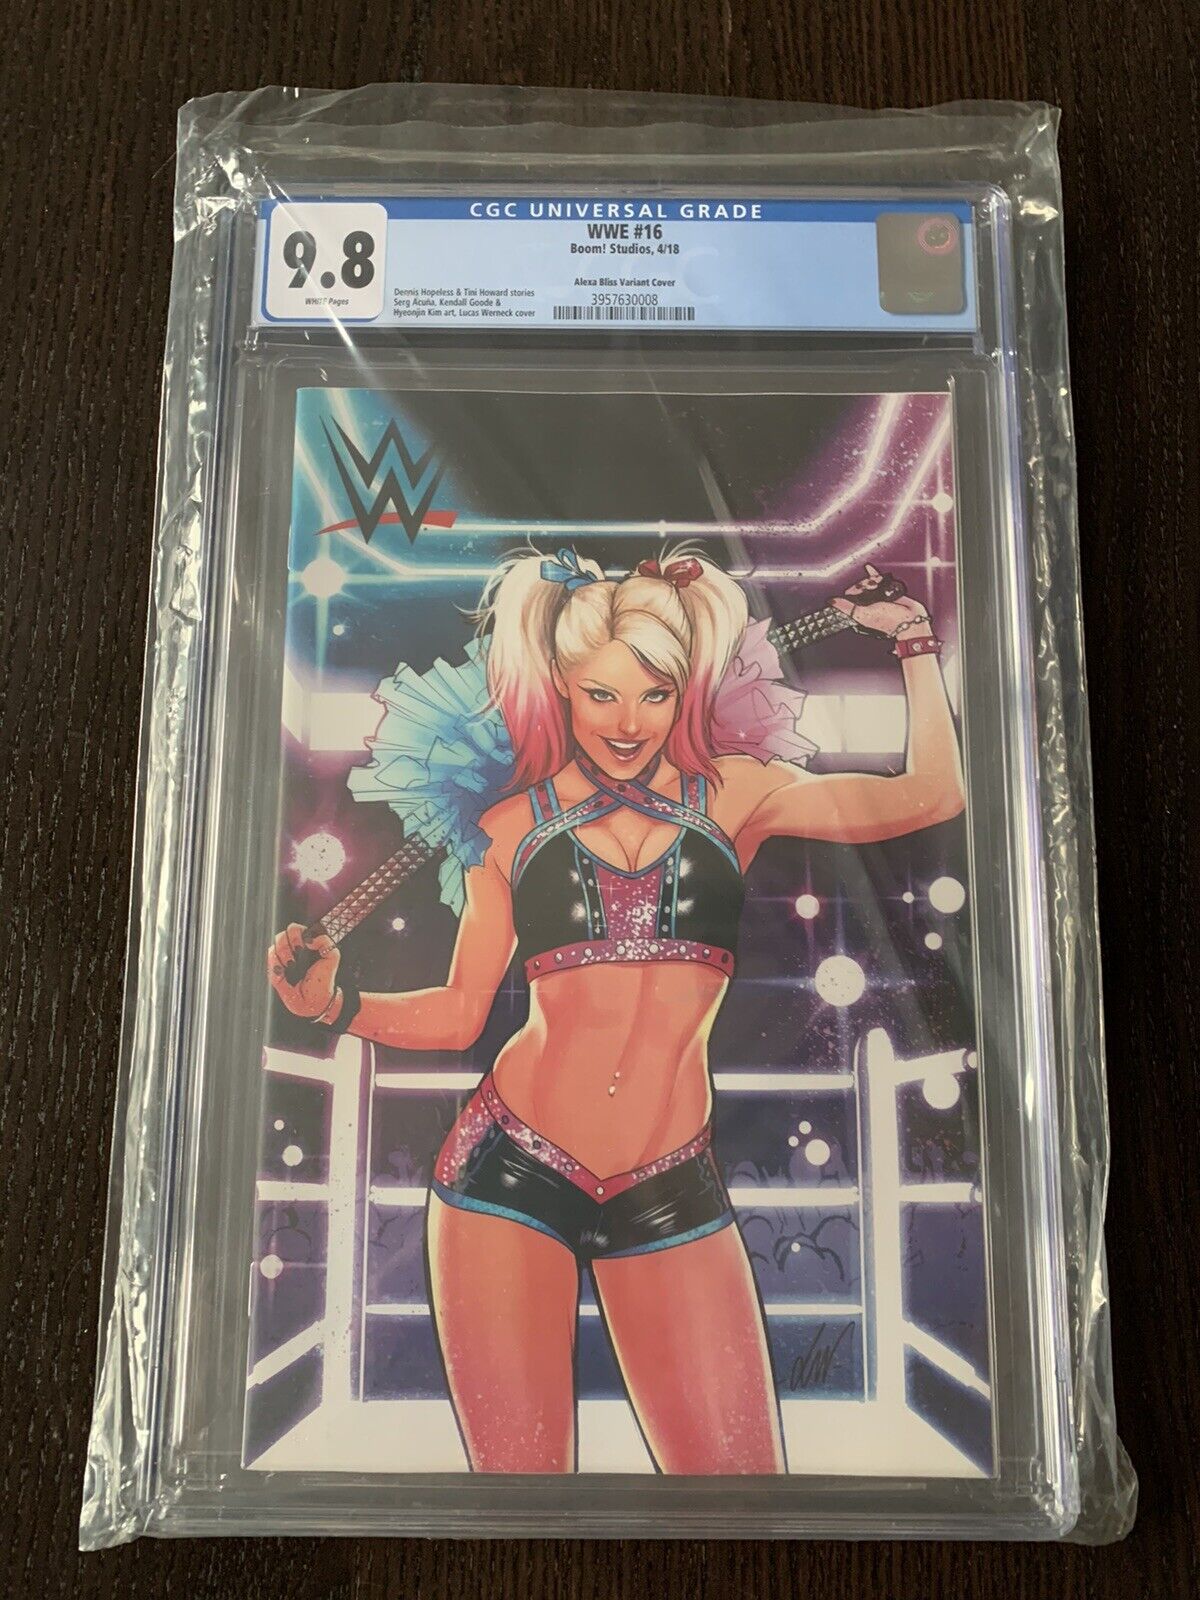 WWE 16 (2018) CGC 9.8  Werneck Alexa Bliss 1:15 Incentive Variant Cover RARE